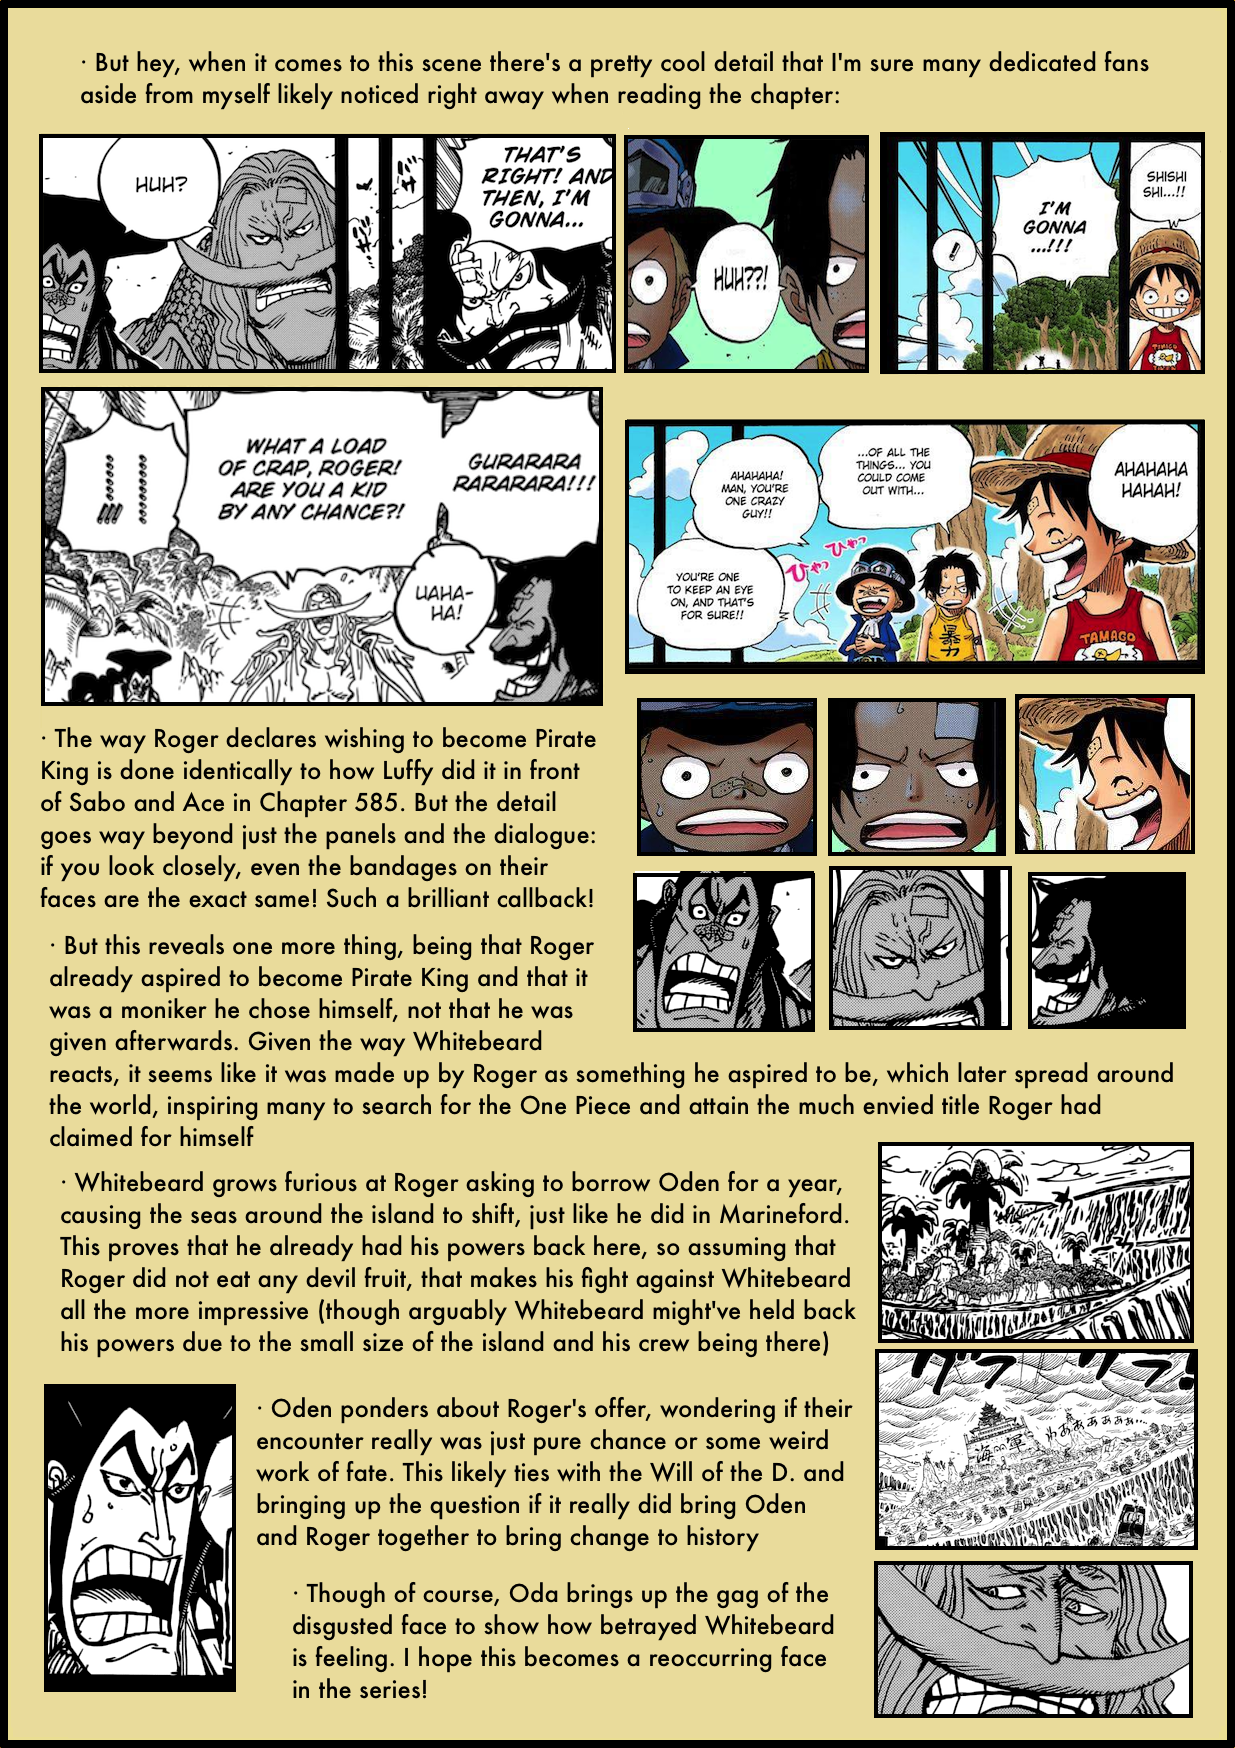 Chapter Secrets Chapter 966 In Depth Analysis The Library Of Ohara